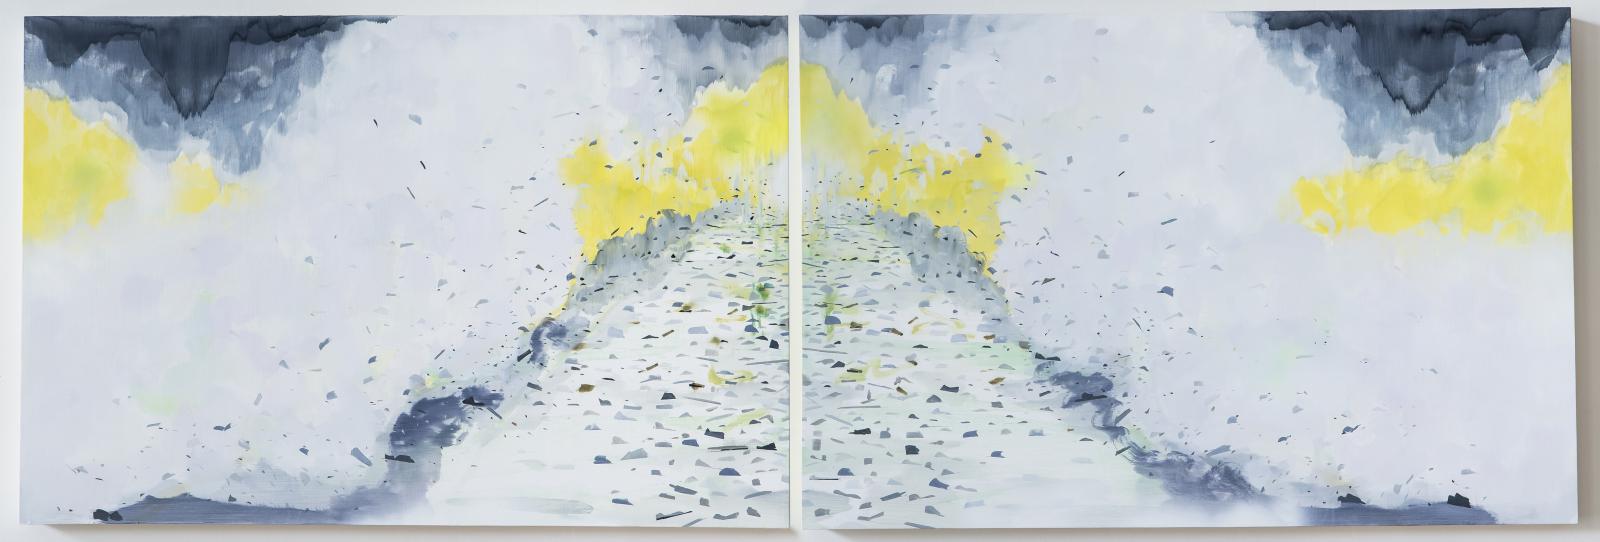 Two-part painting of waves crashing into the shore. Diptych 24 x 73 inches, each panel is 24 x 36 inches 